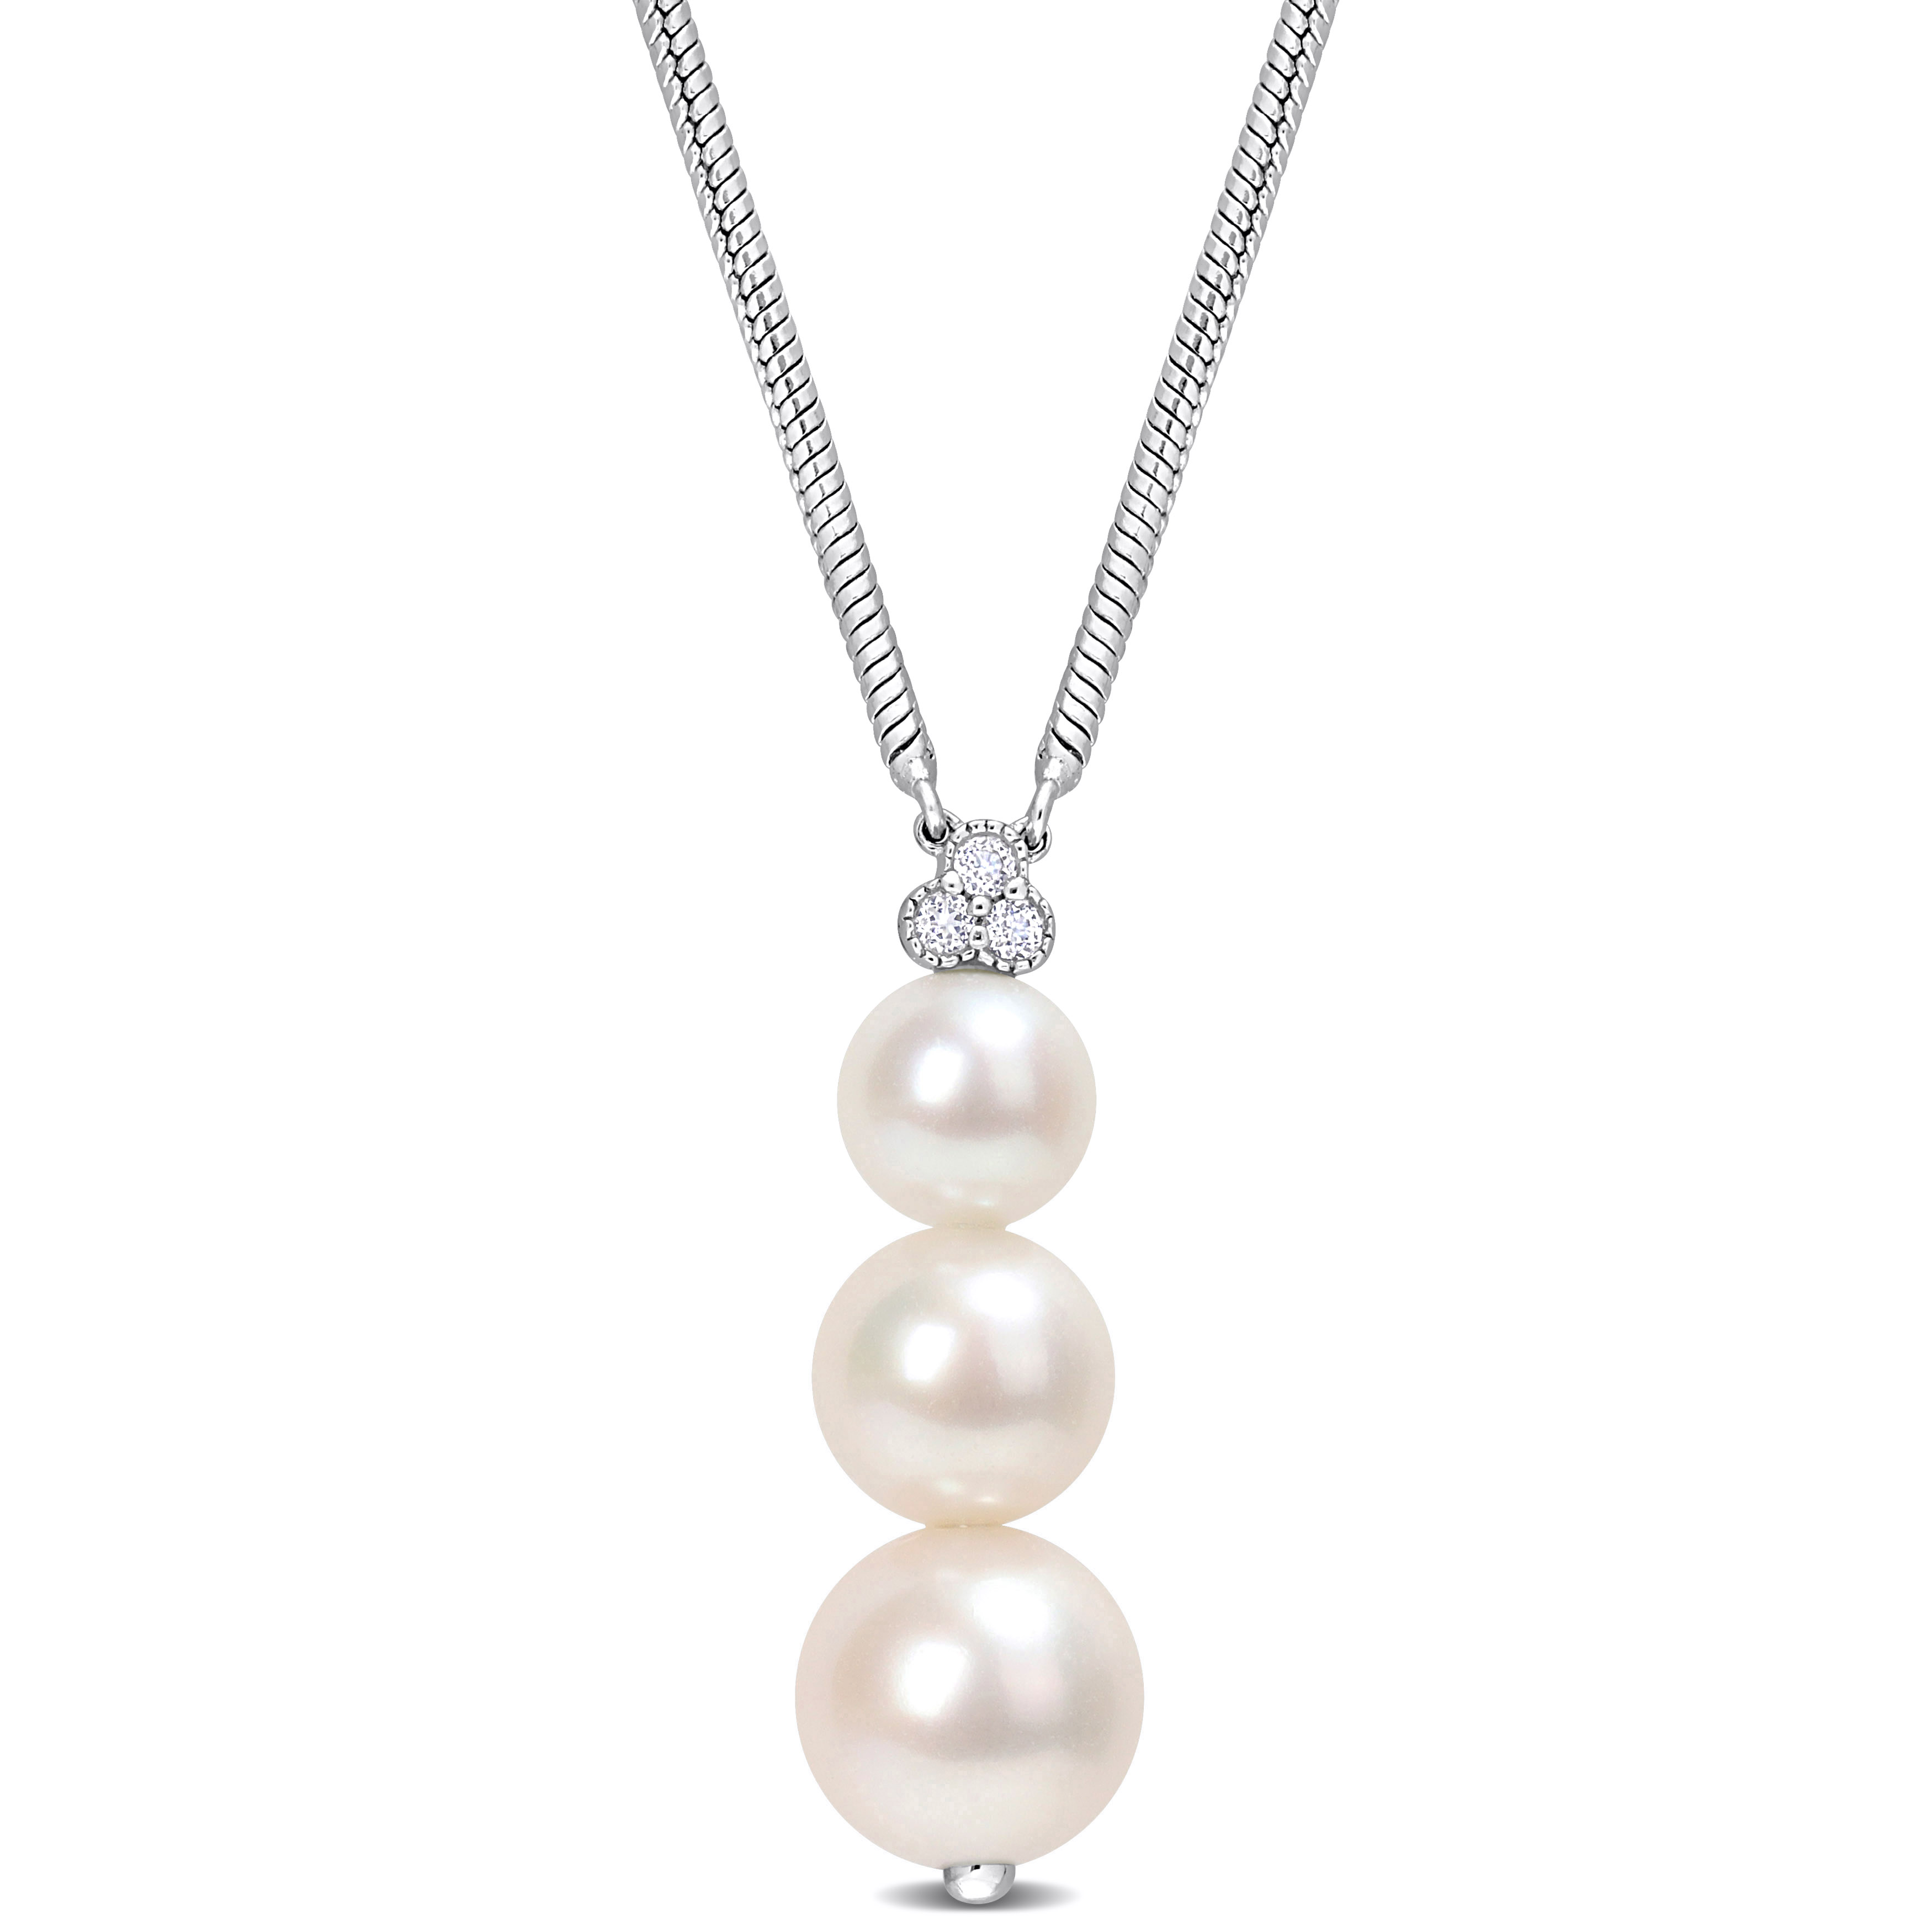 Freshwater Cultured Pearl and 1/10 CT TGW White Topaz Graduated Pendant with Chain in Sterling Silver - 18 in.